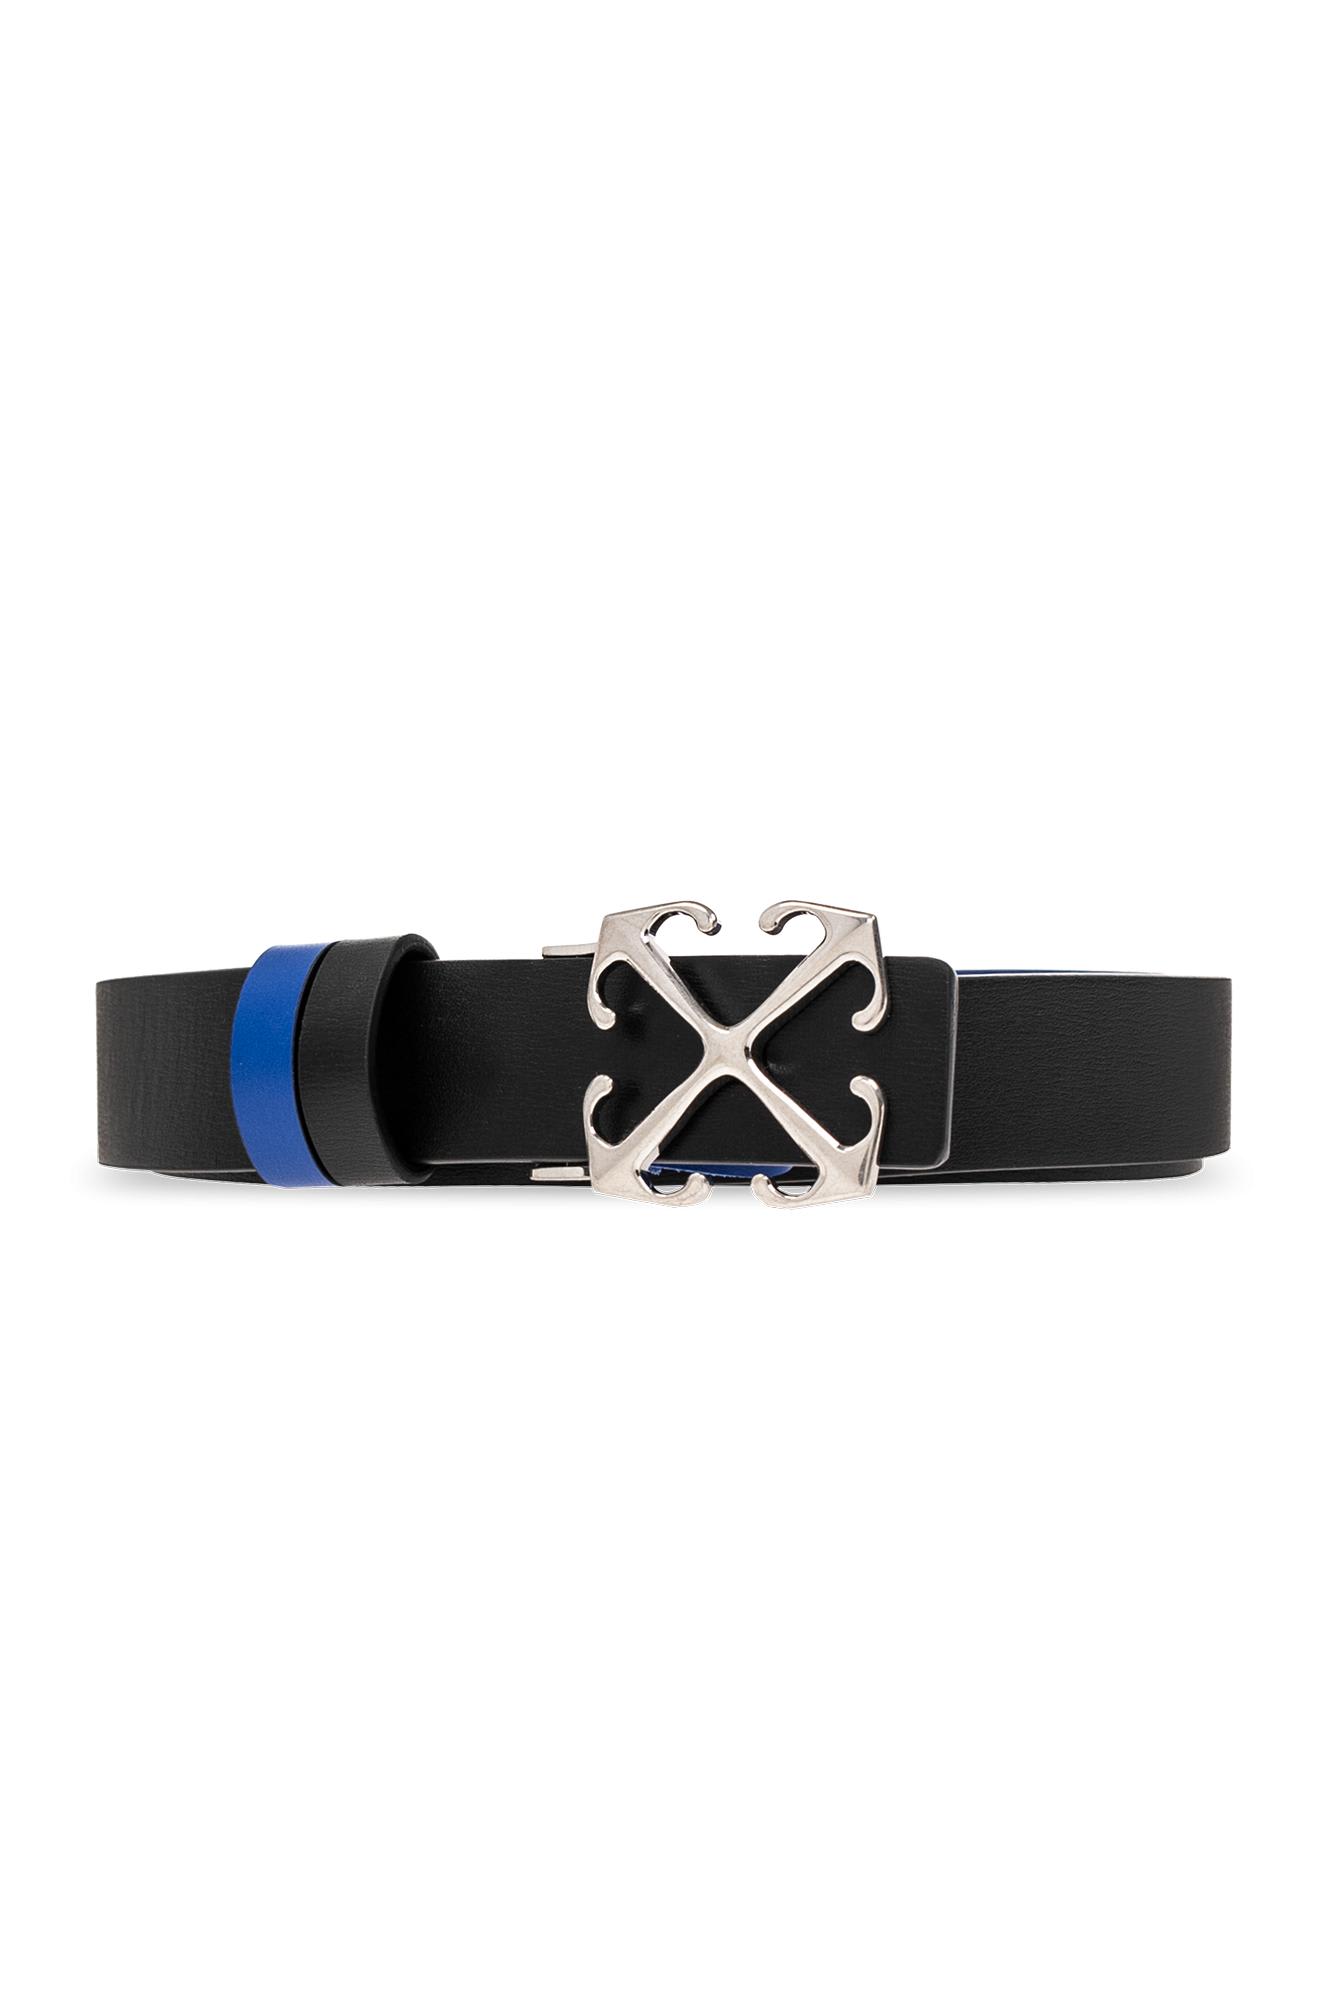 OFF-WHITE REVERSIBLE BELT WITH LOGO